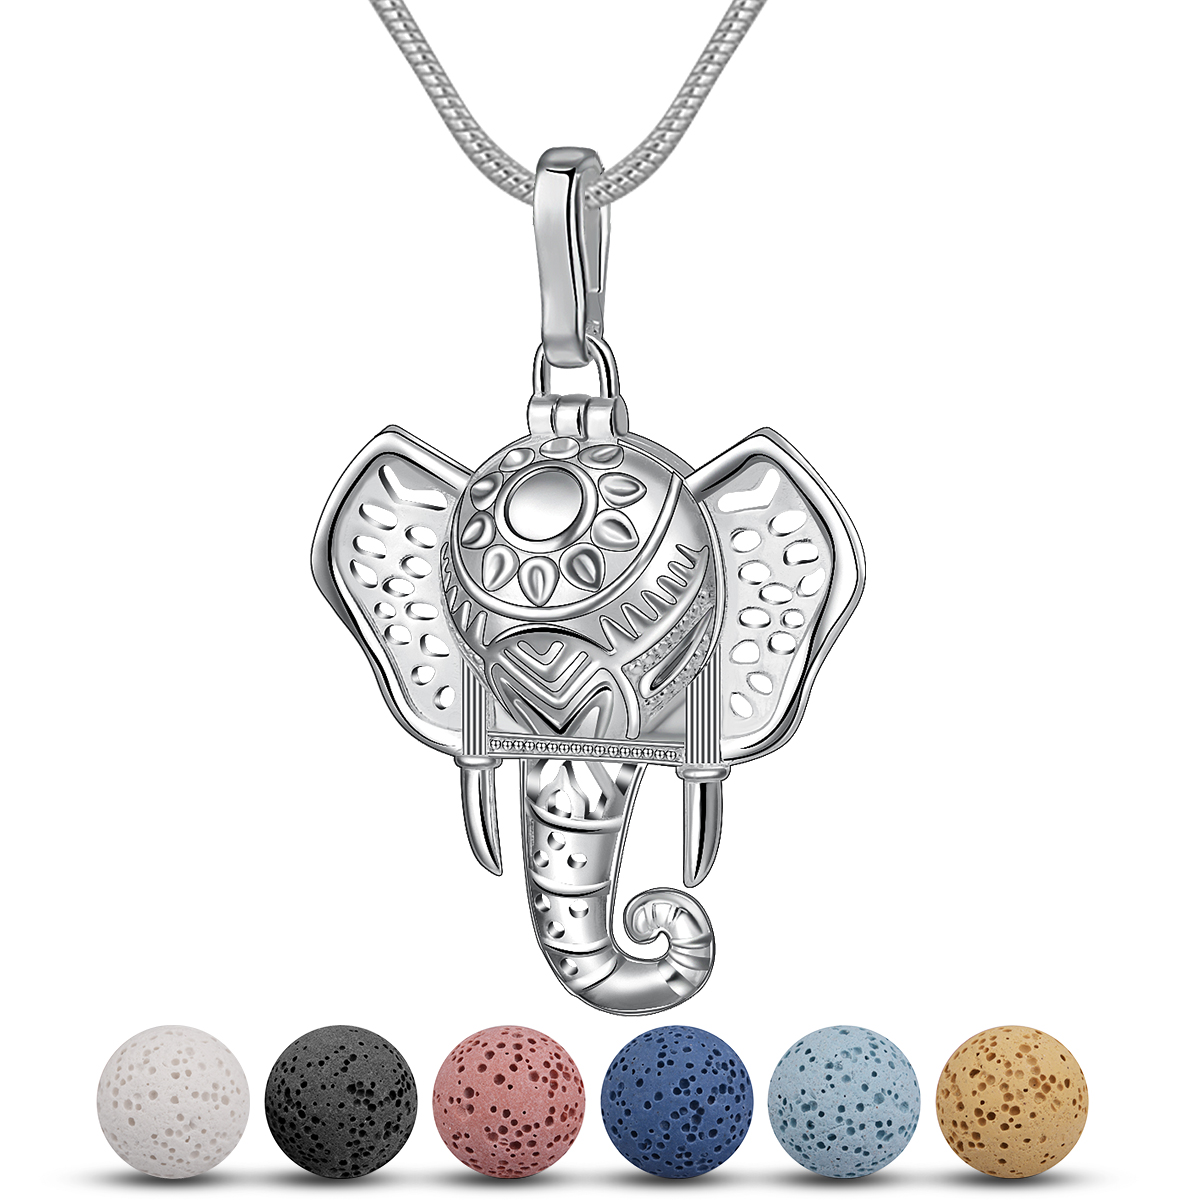 Merryshine Jewelry Copper Plating Silver Elephant Shaped Vintage Essential Oil Diffuser Lava Bead Aromatherapy Necklace